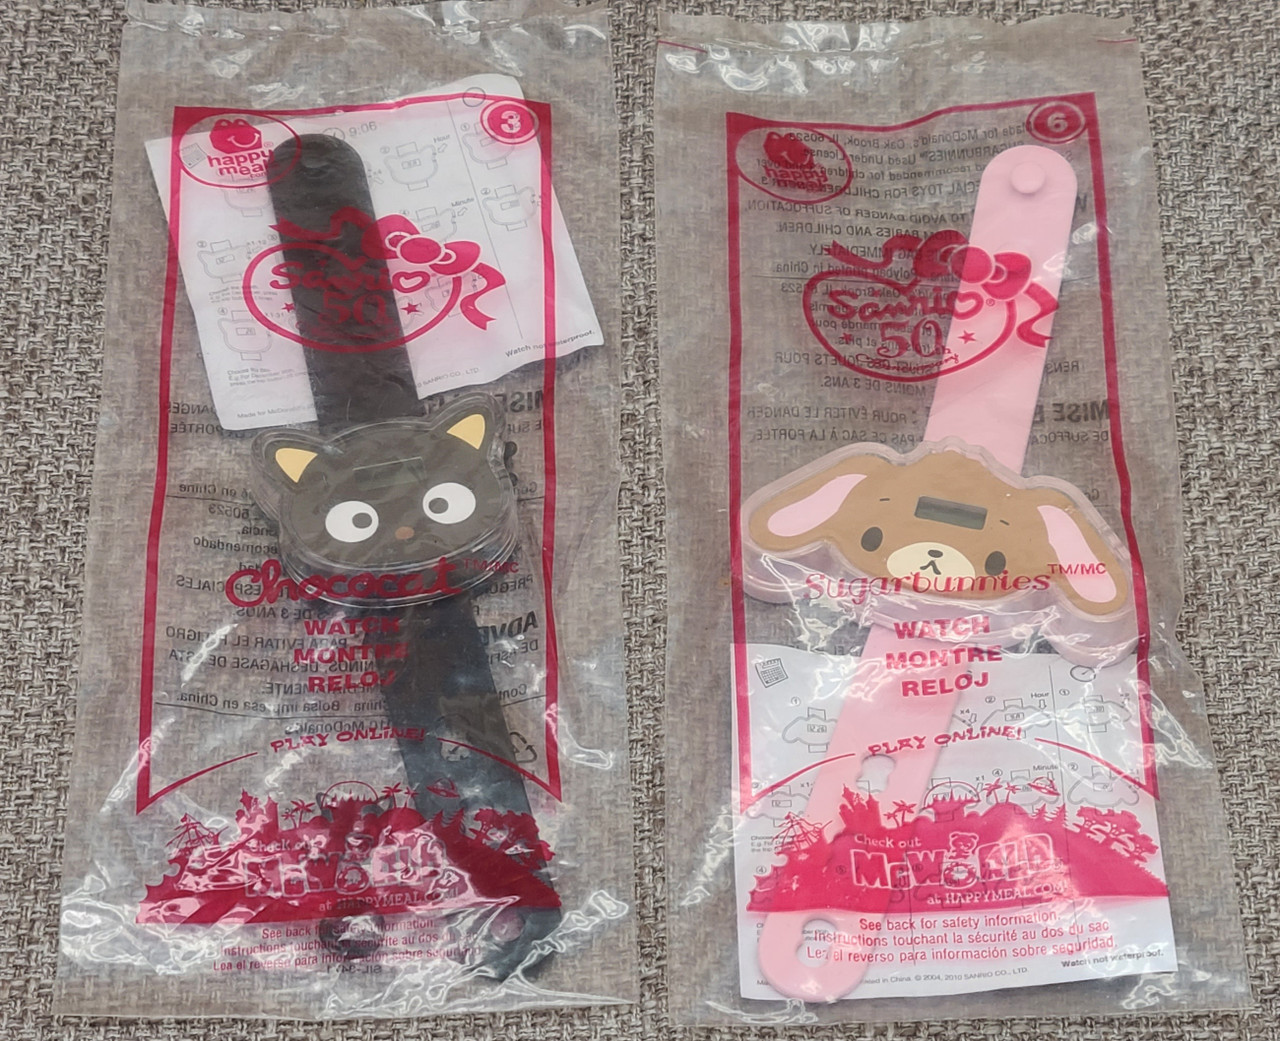 2 "SANRIO" McDonalds Happy Meal Toys (watches)